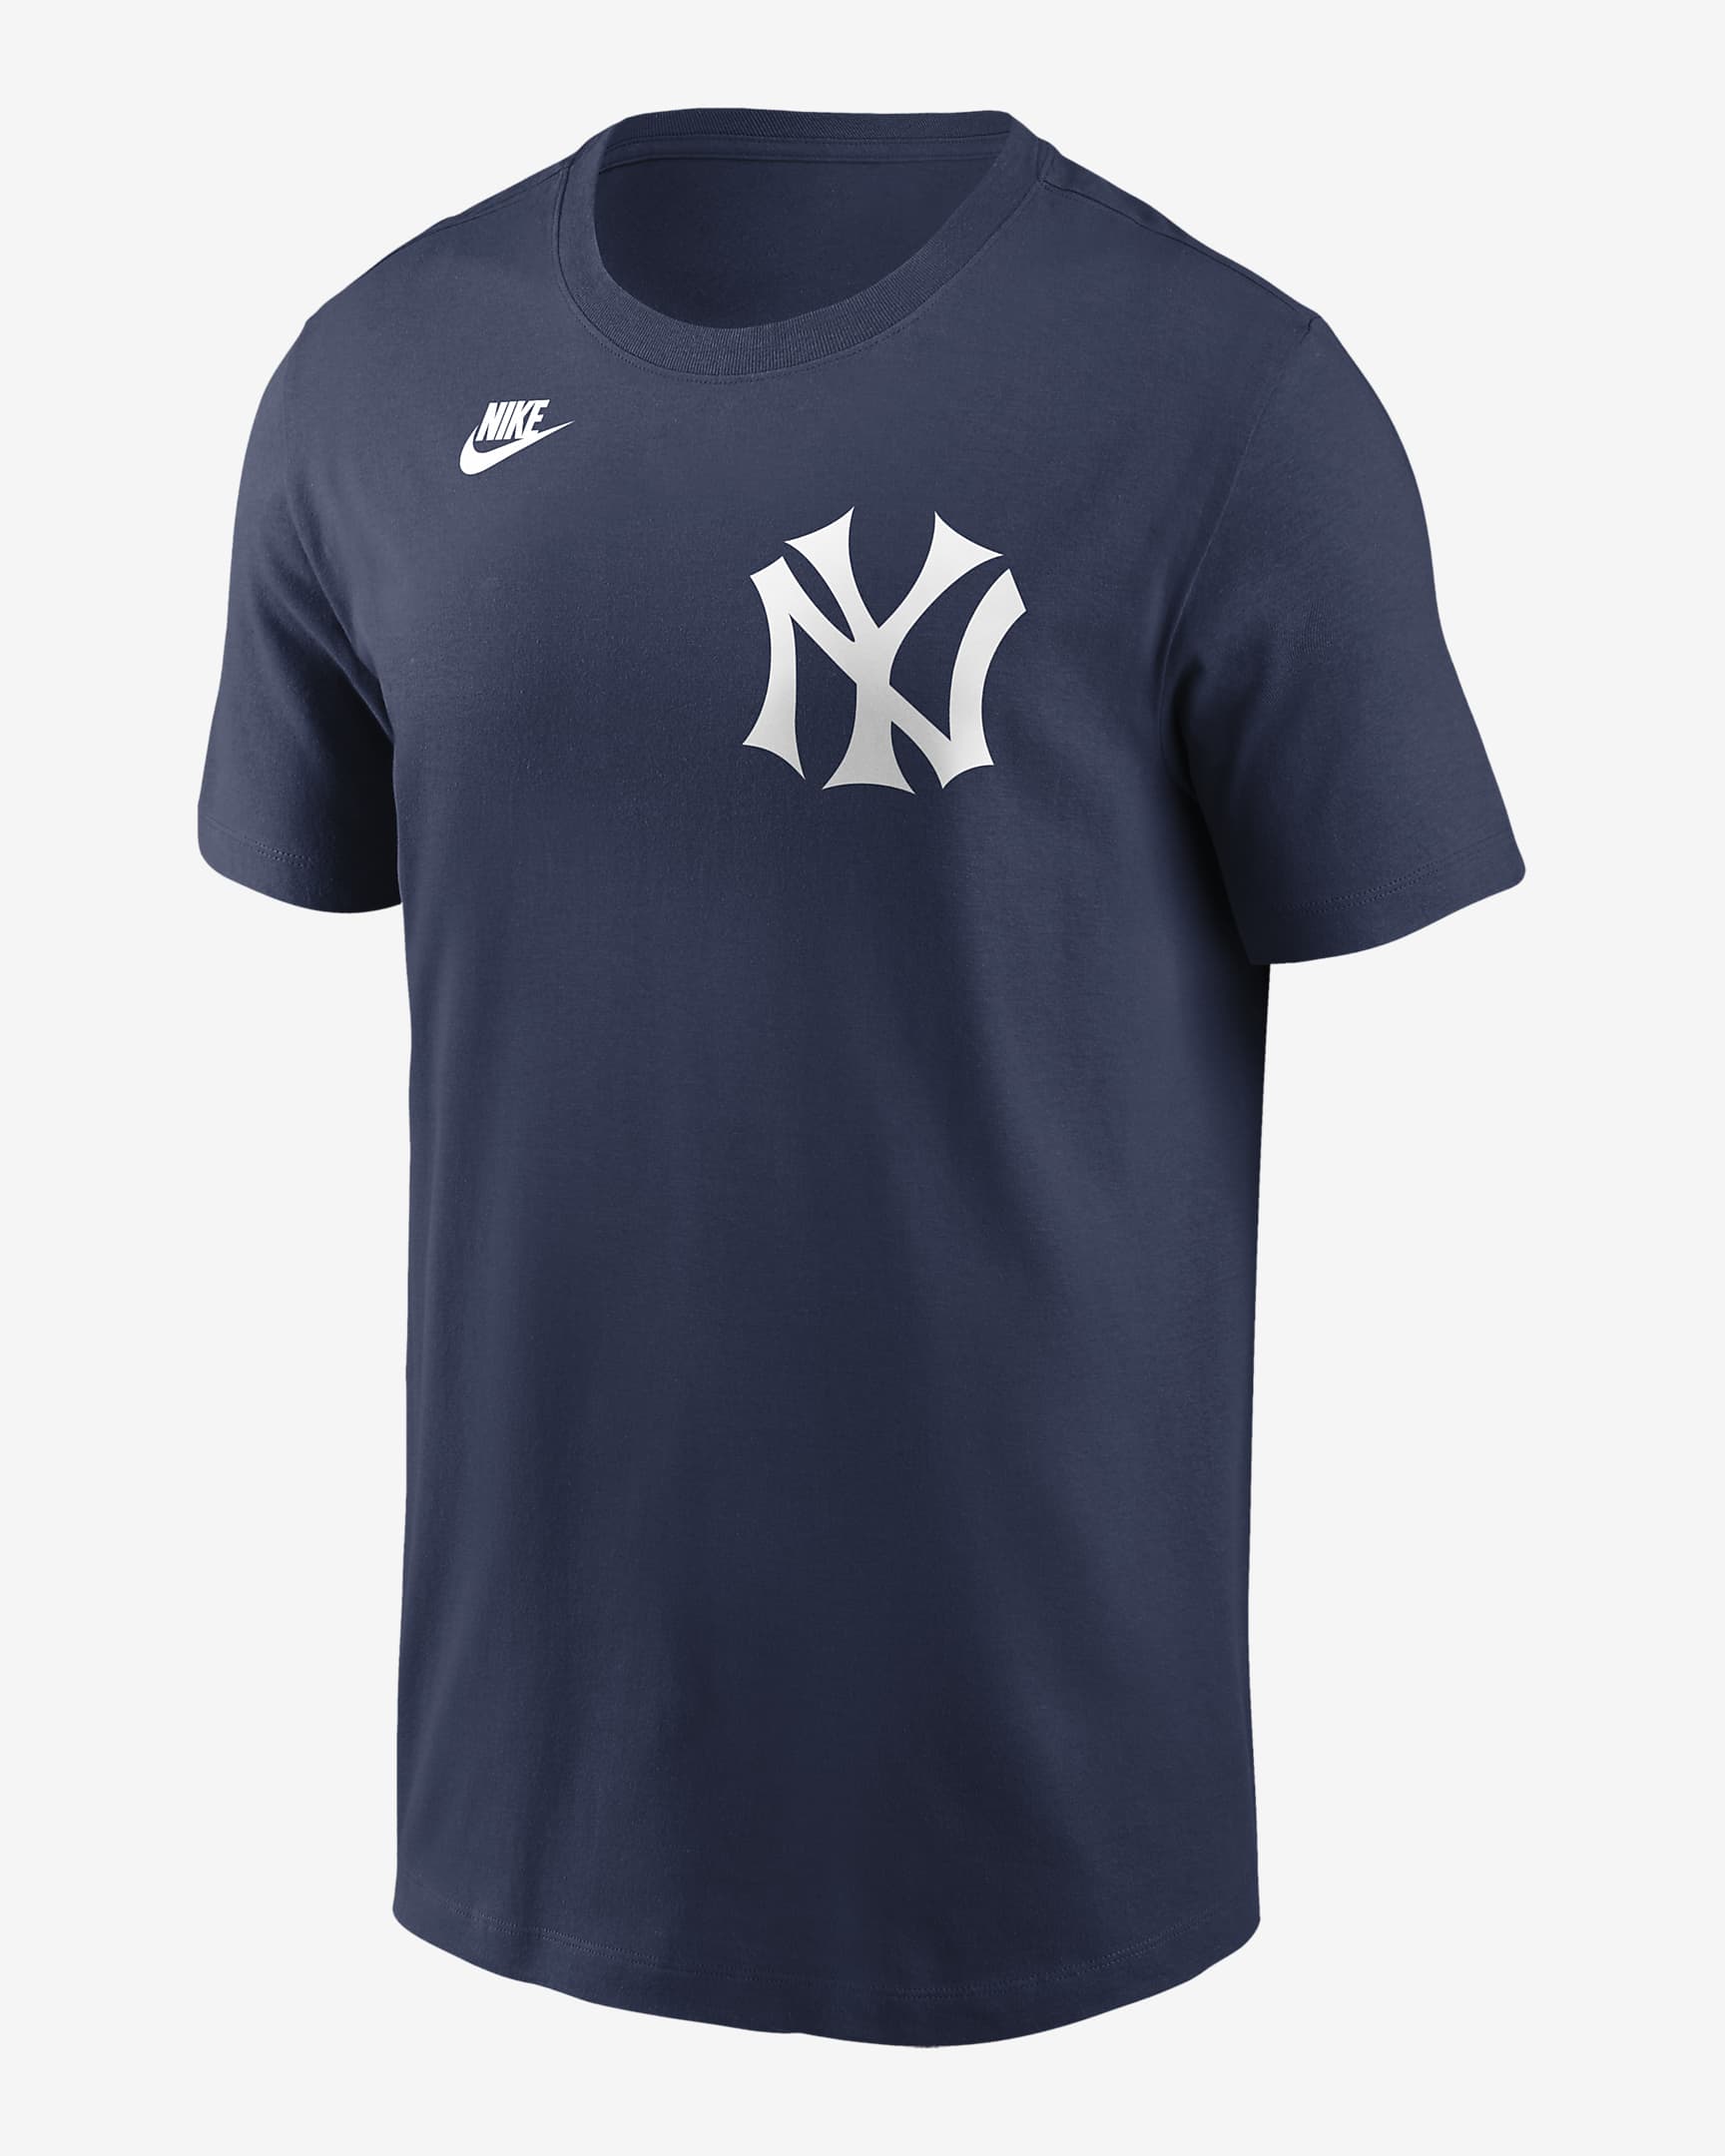 Babe Ruth New York Yankees Cooperstown Fuse Men's Nike MLB T-Shirt ...